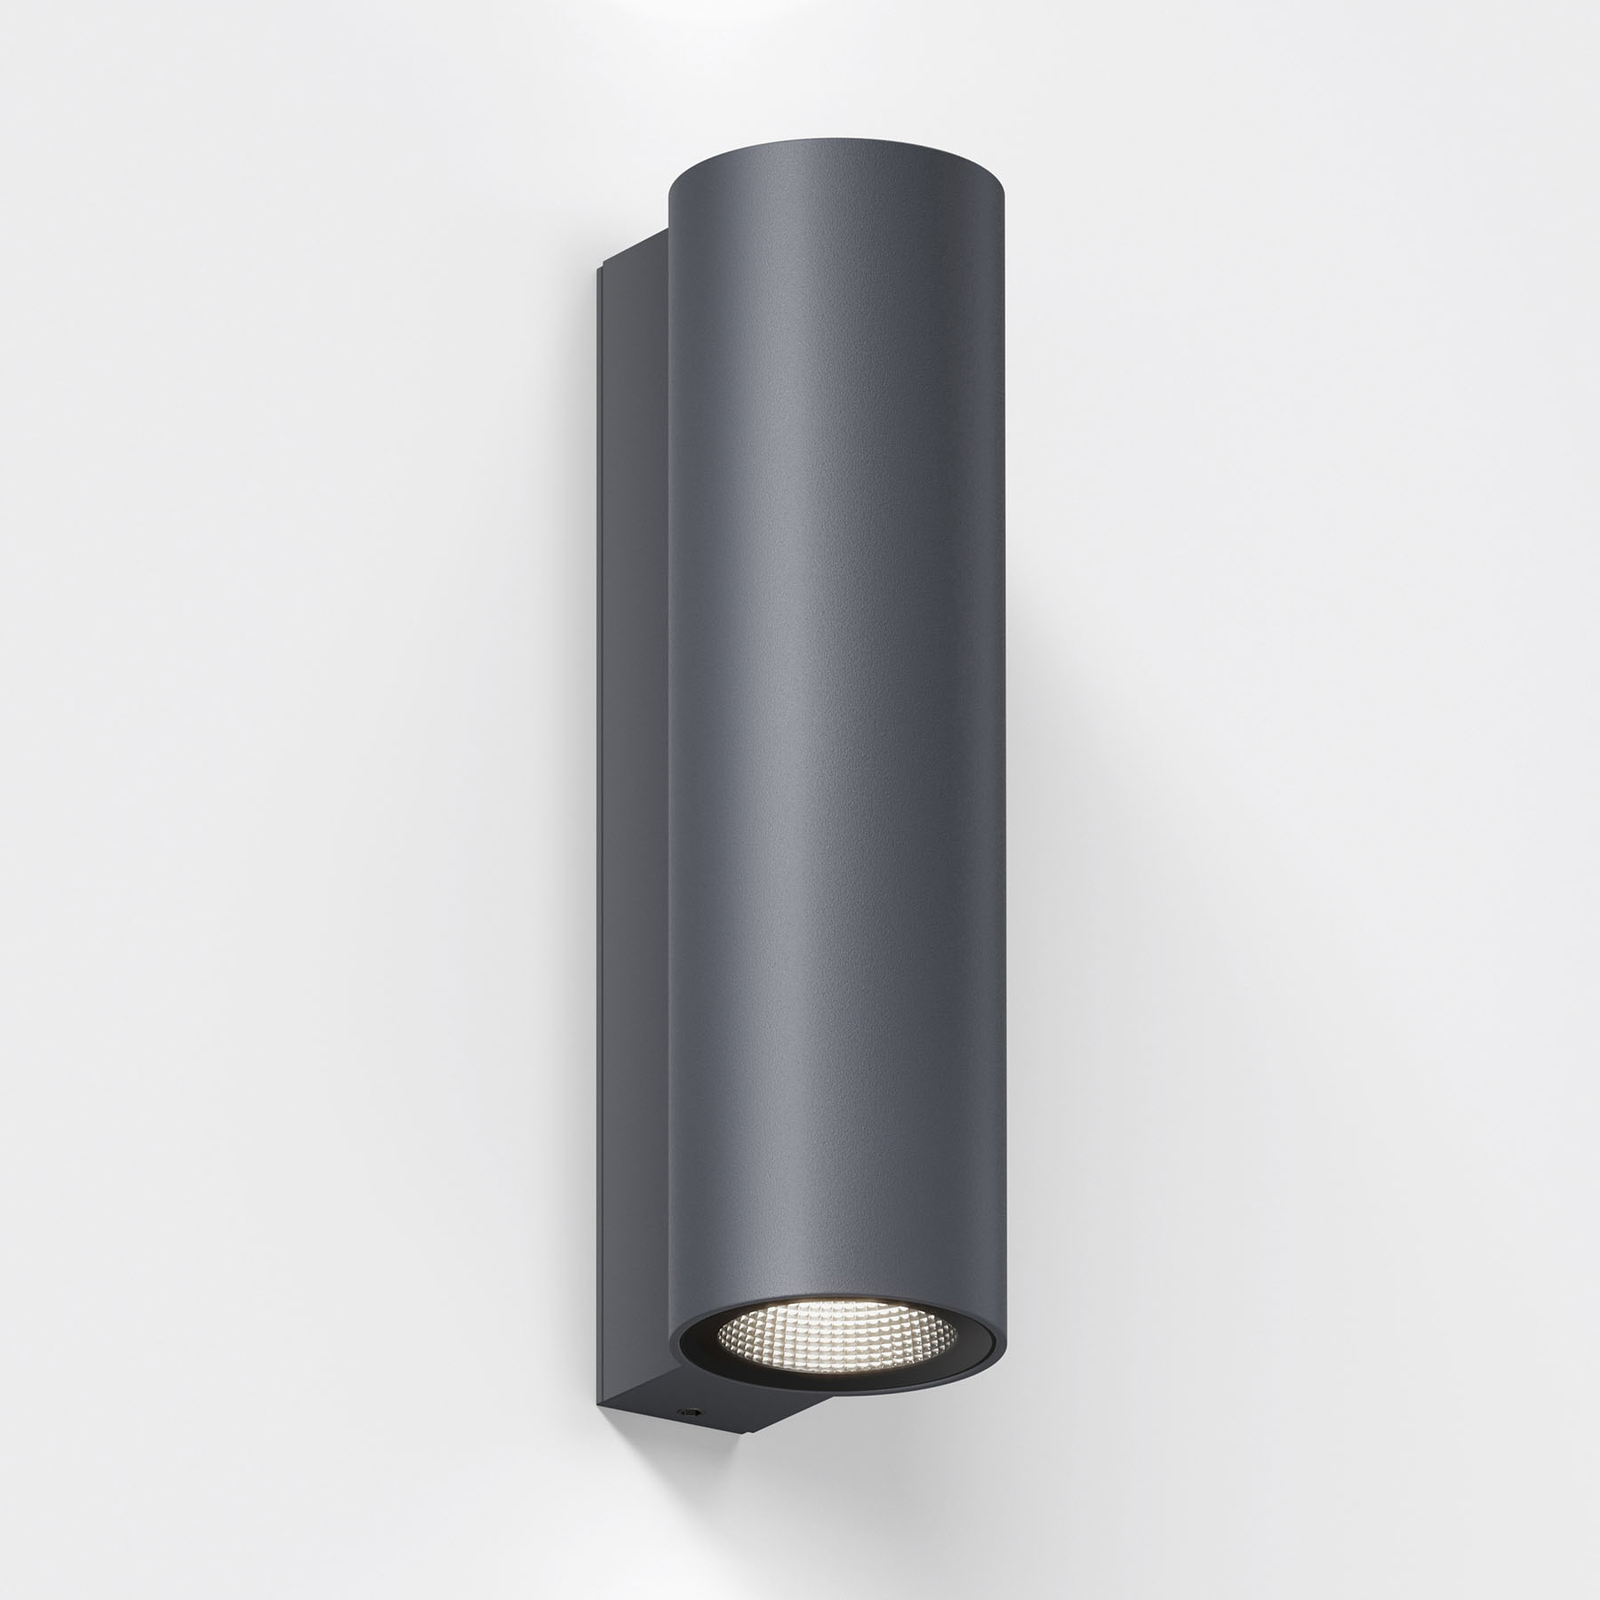 IP44.de Scap LED outdoor wall light, anthracite